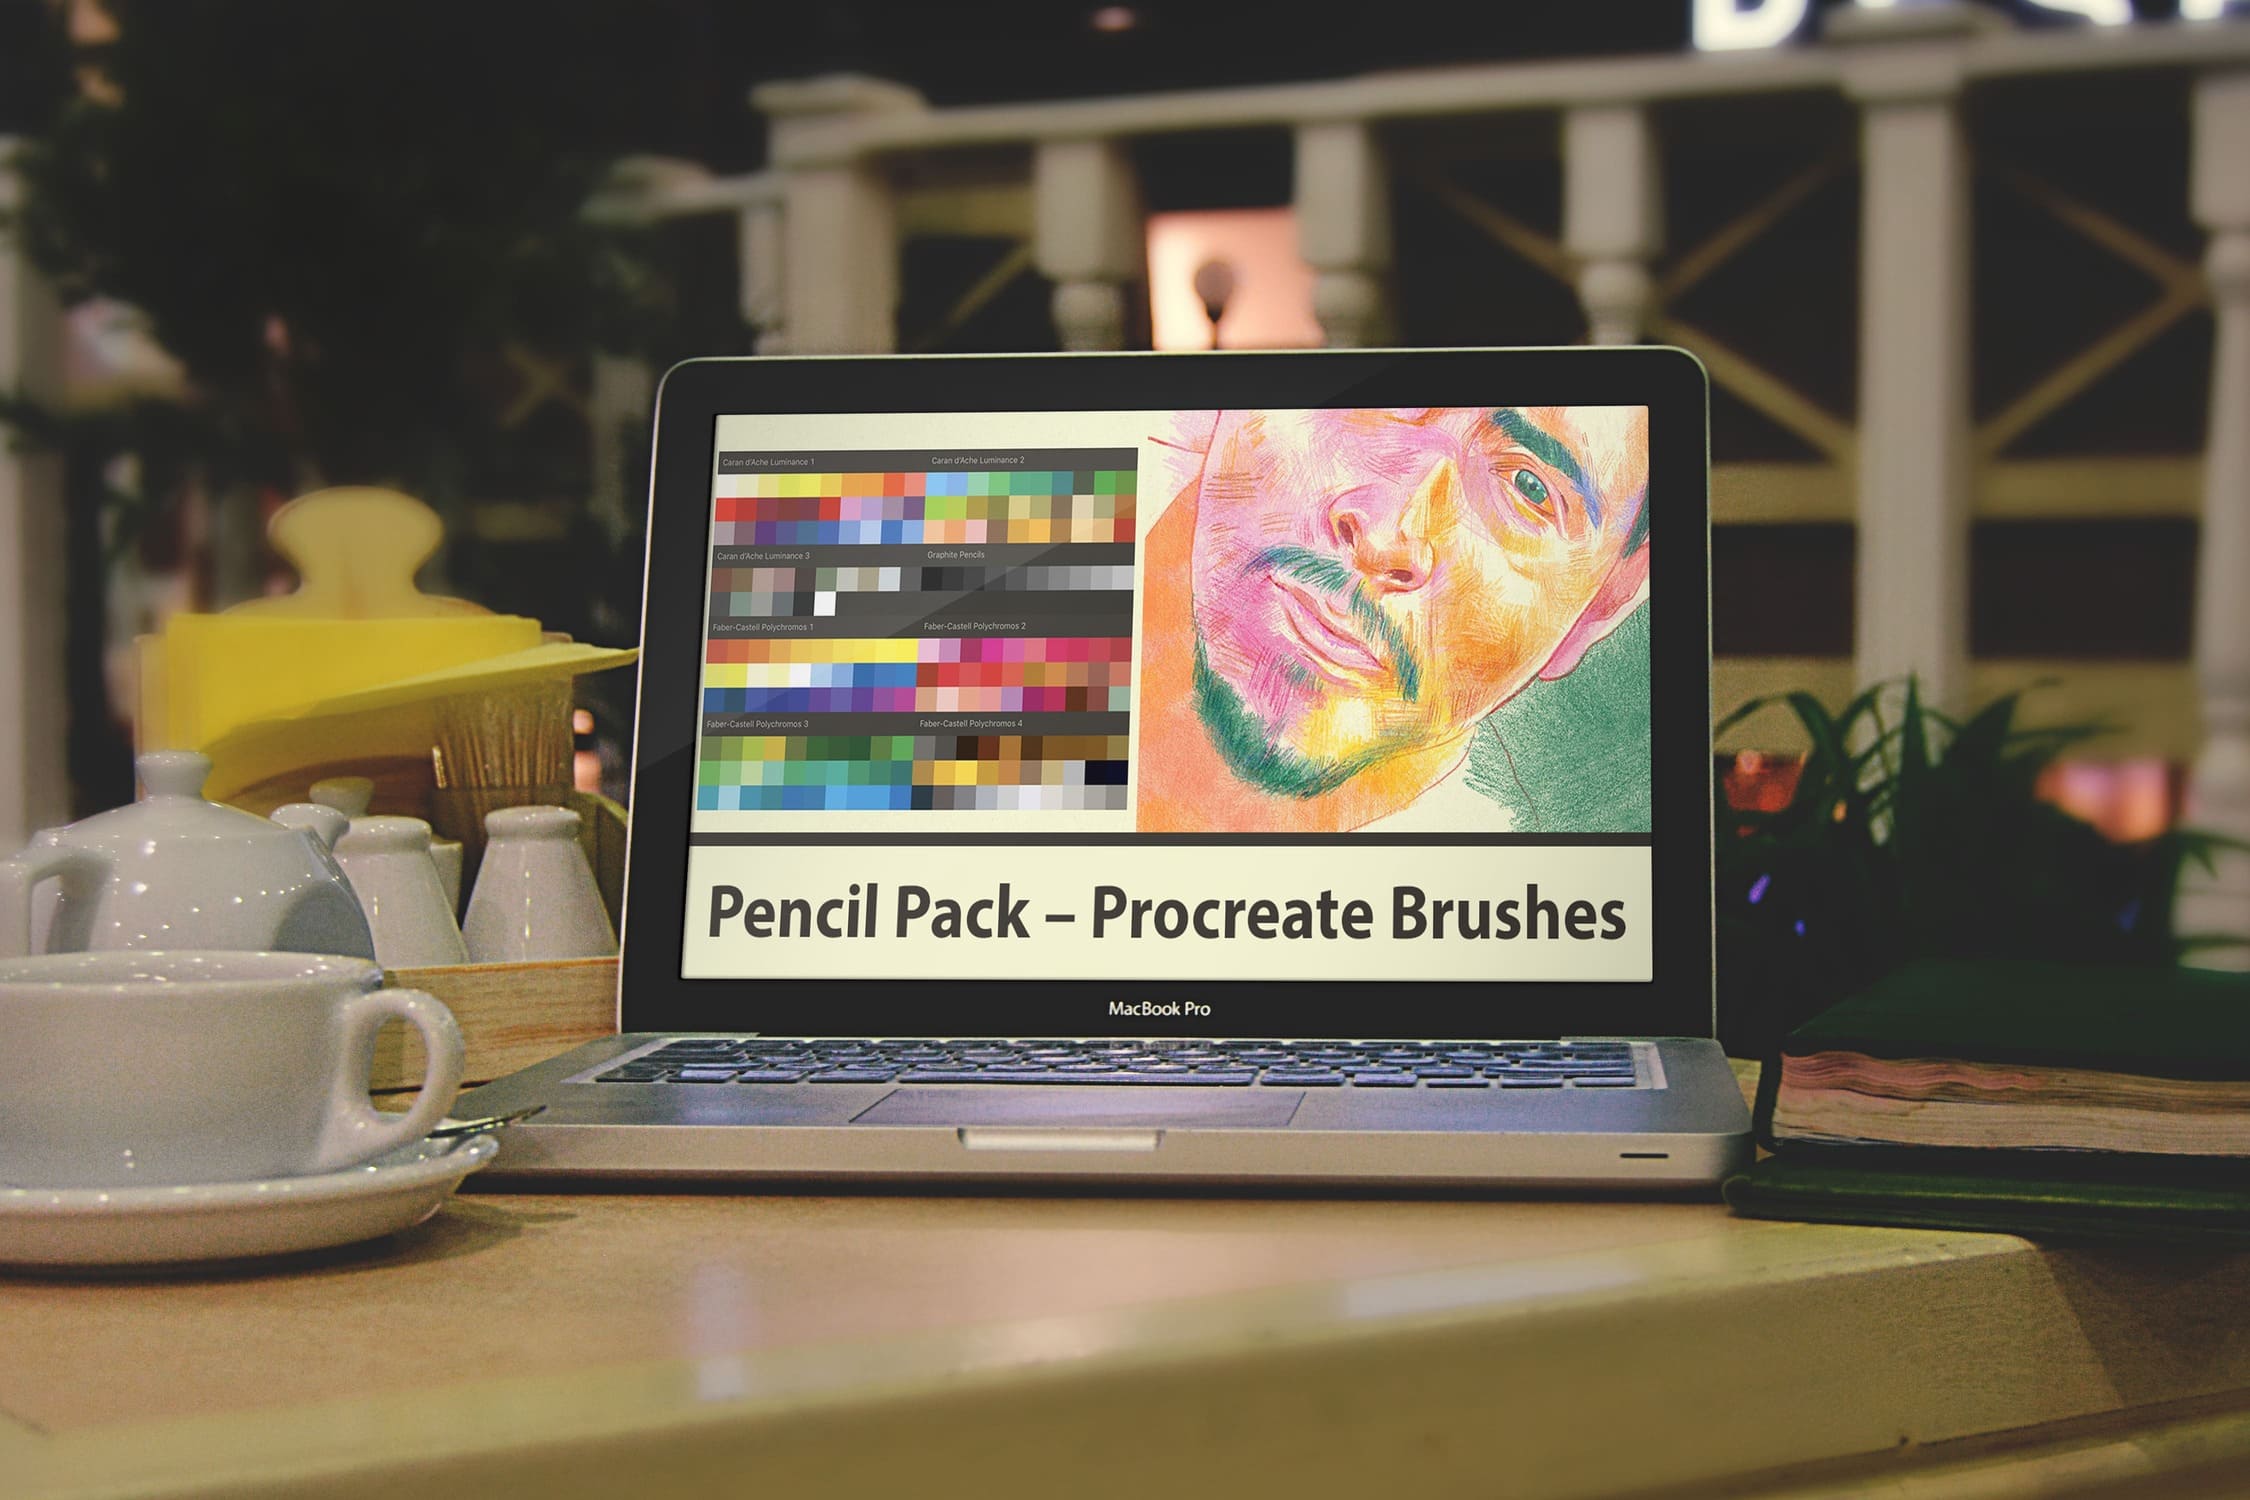 Pencil Pack- Procreate Brushes On The Laptop.